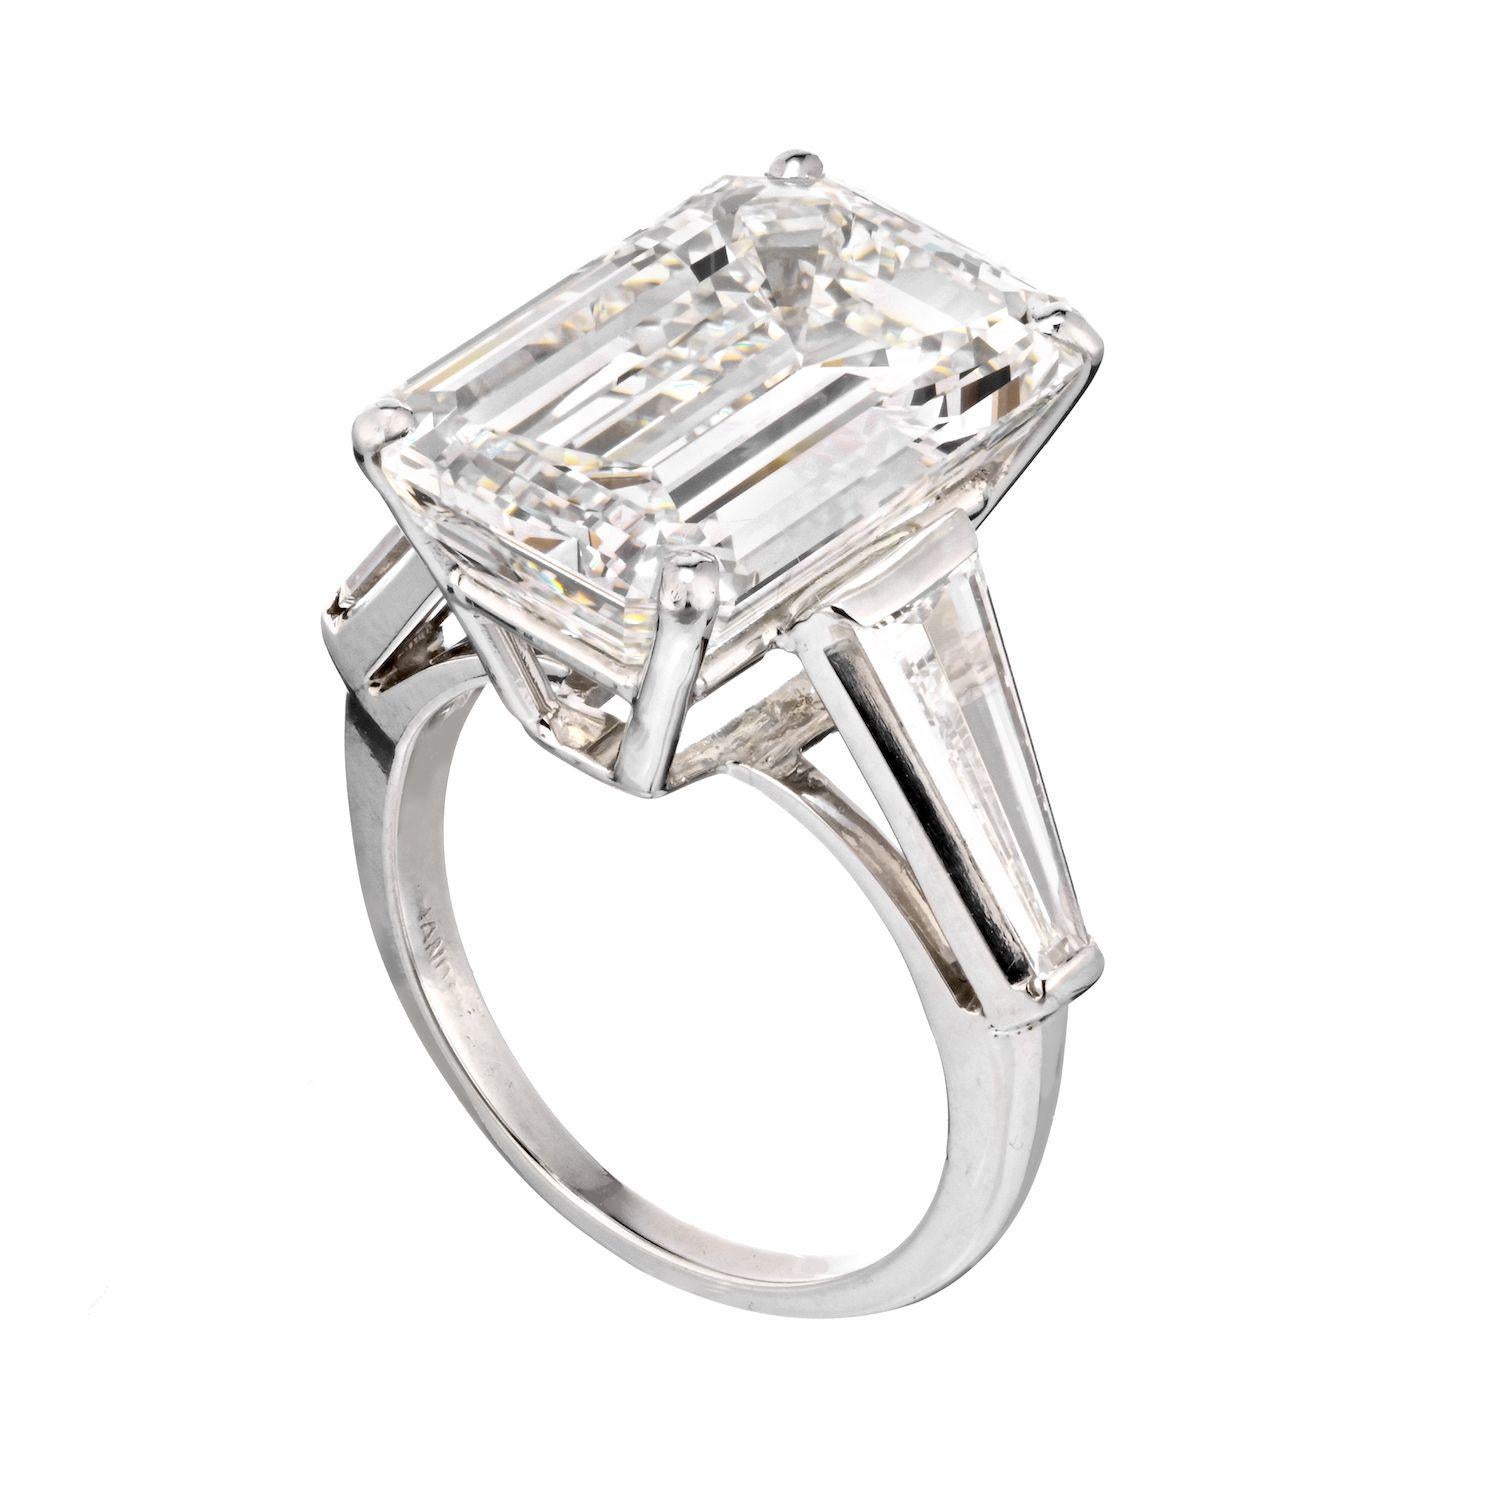 11.89 Carat Emerald Cut Diamond I/VS1 GIA Platinum Engagement Ring In Excellent Condition For Sale In New York, NY